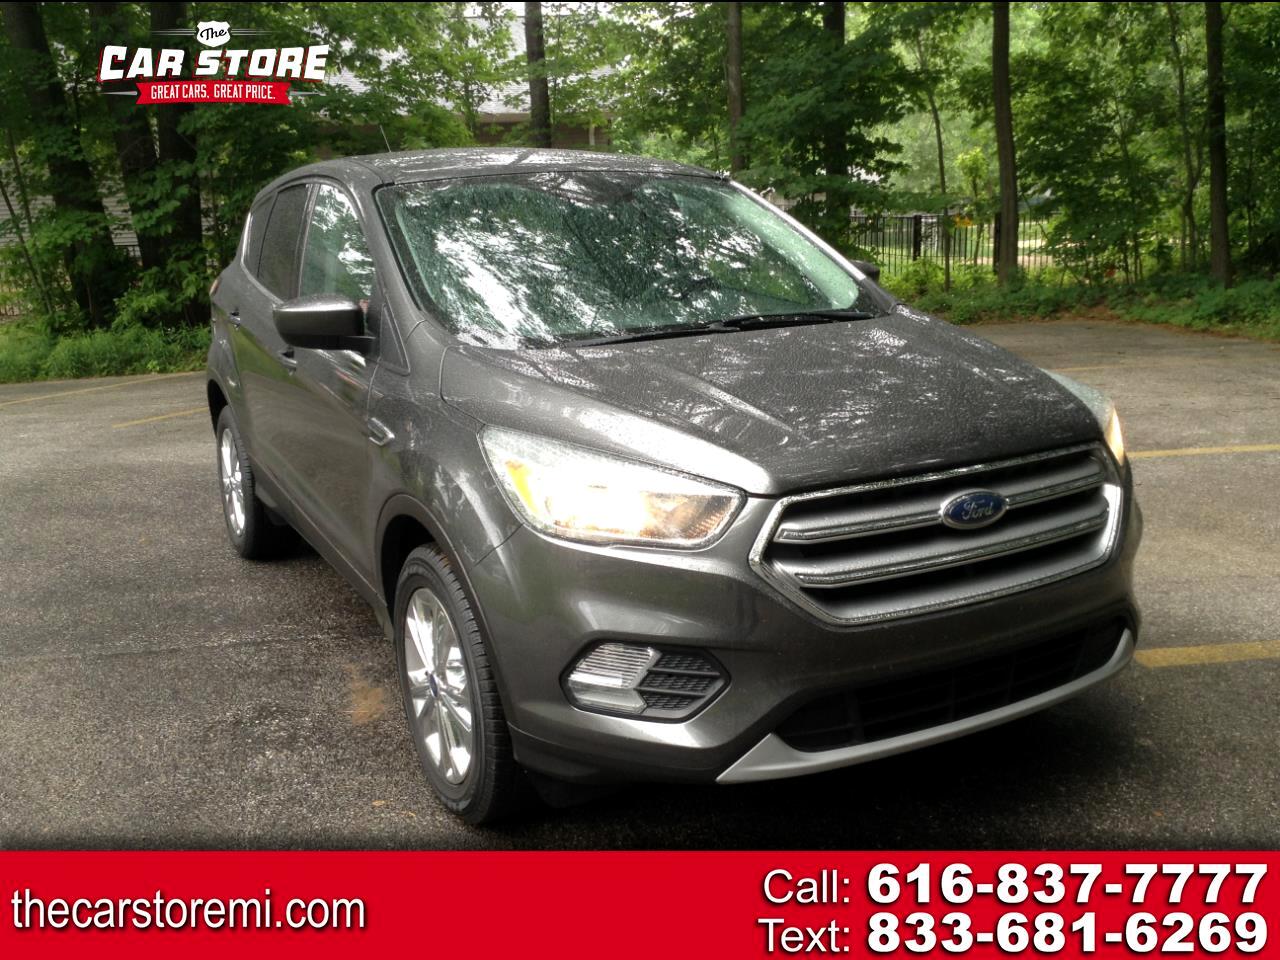 Used Ford Escape Fruitport Charter Twp Mi